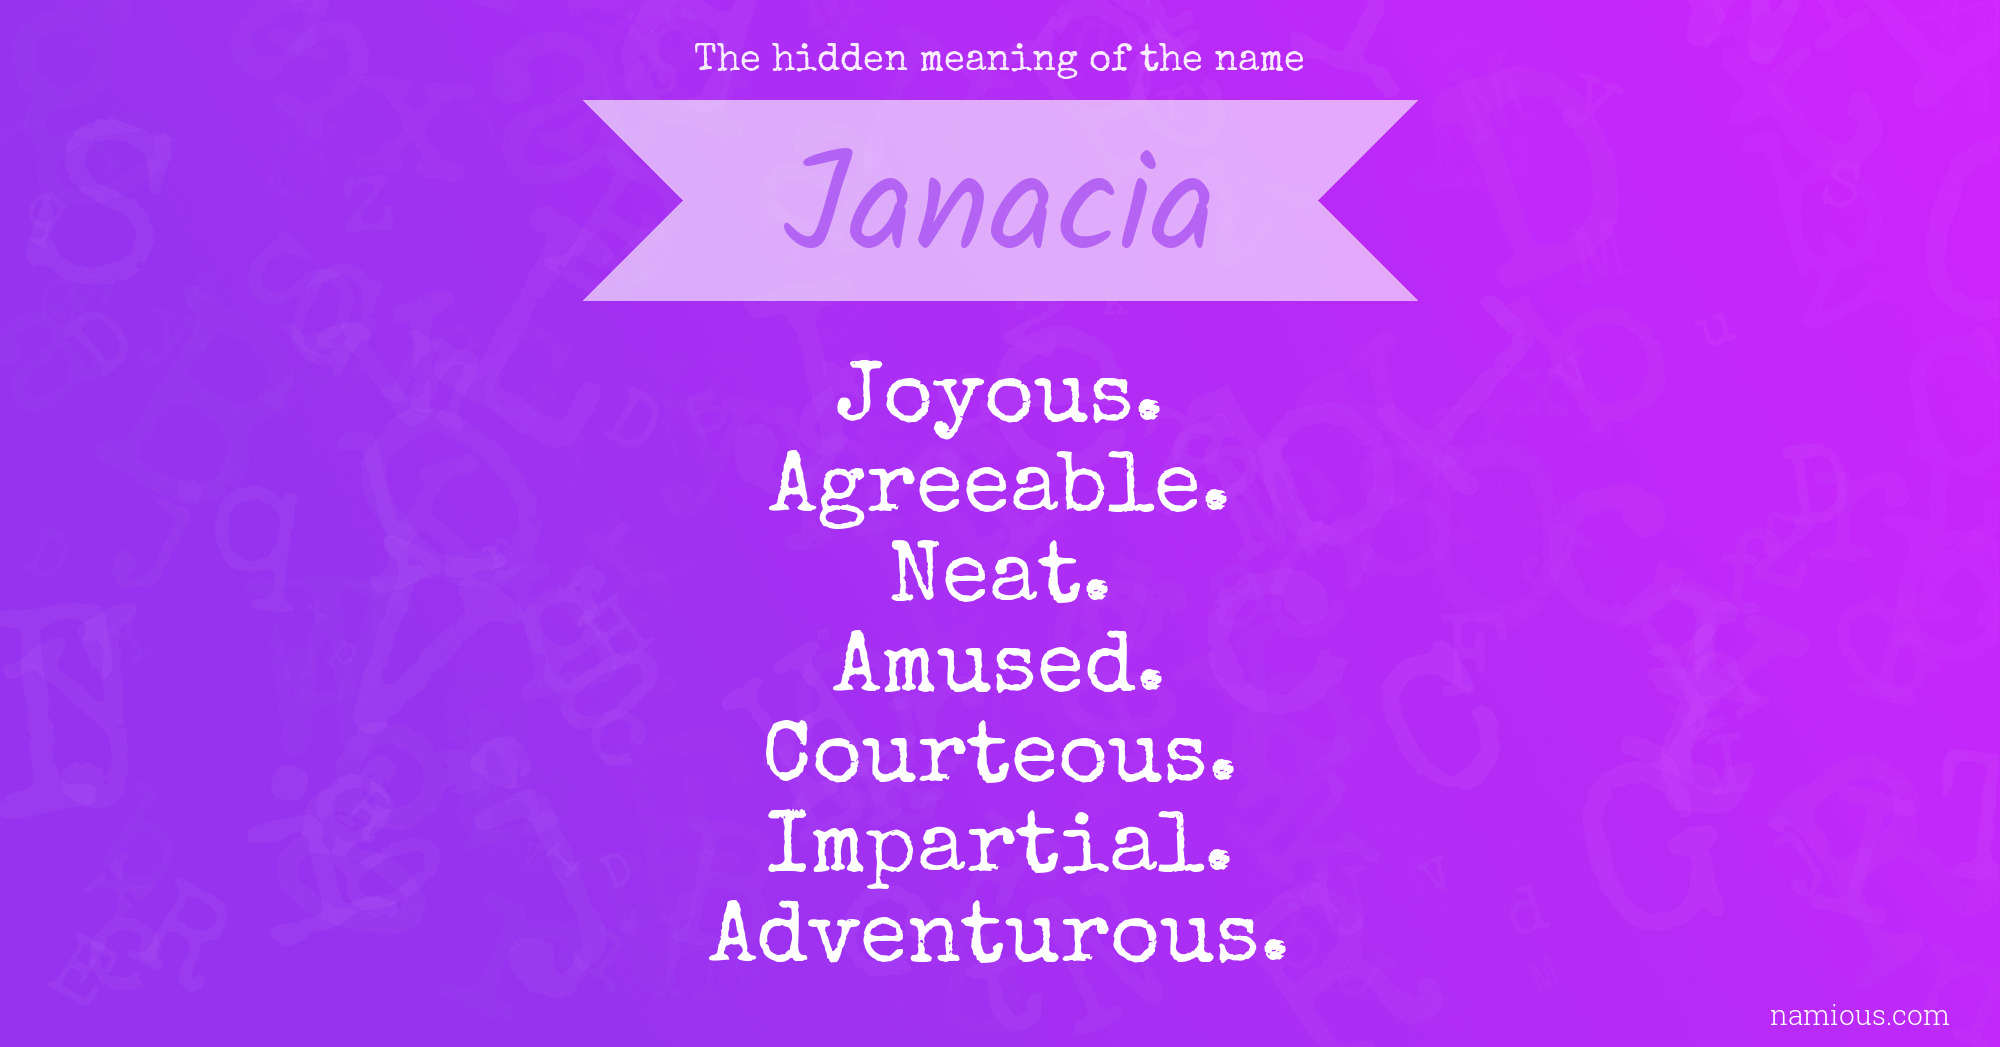 The hidden meaning of the name Janacia